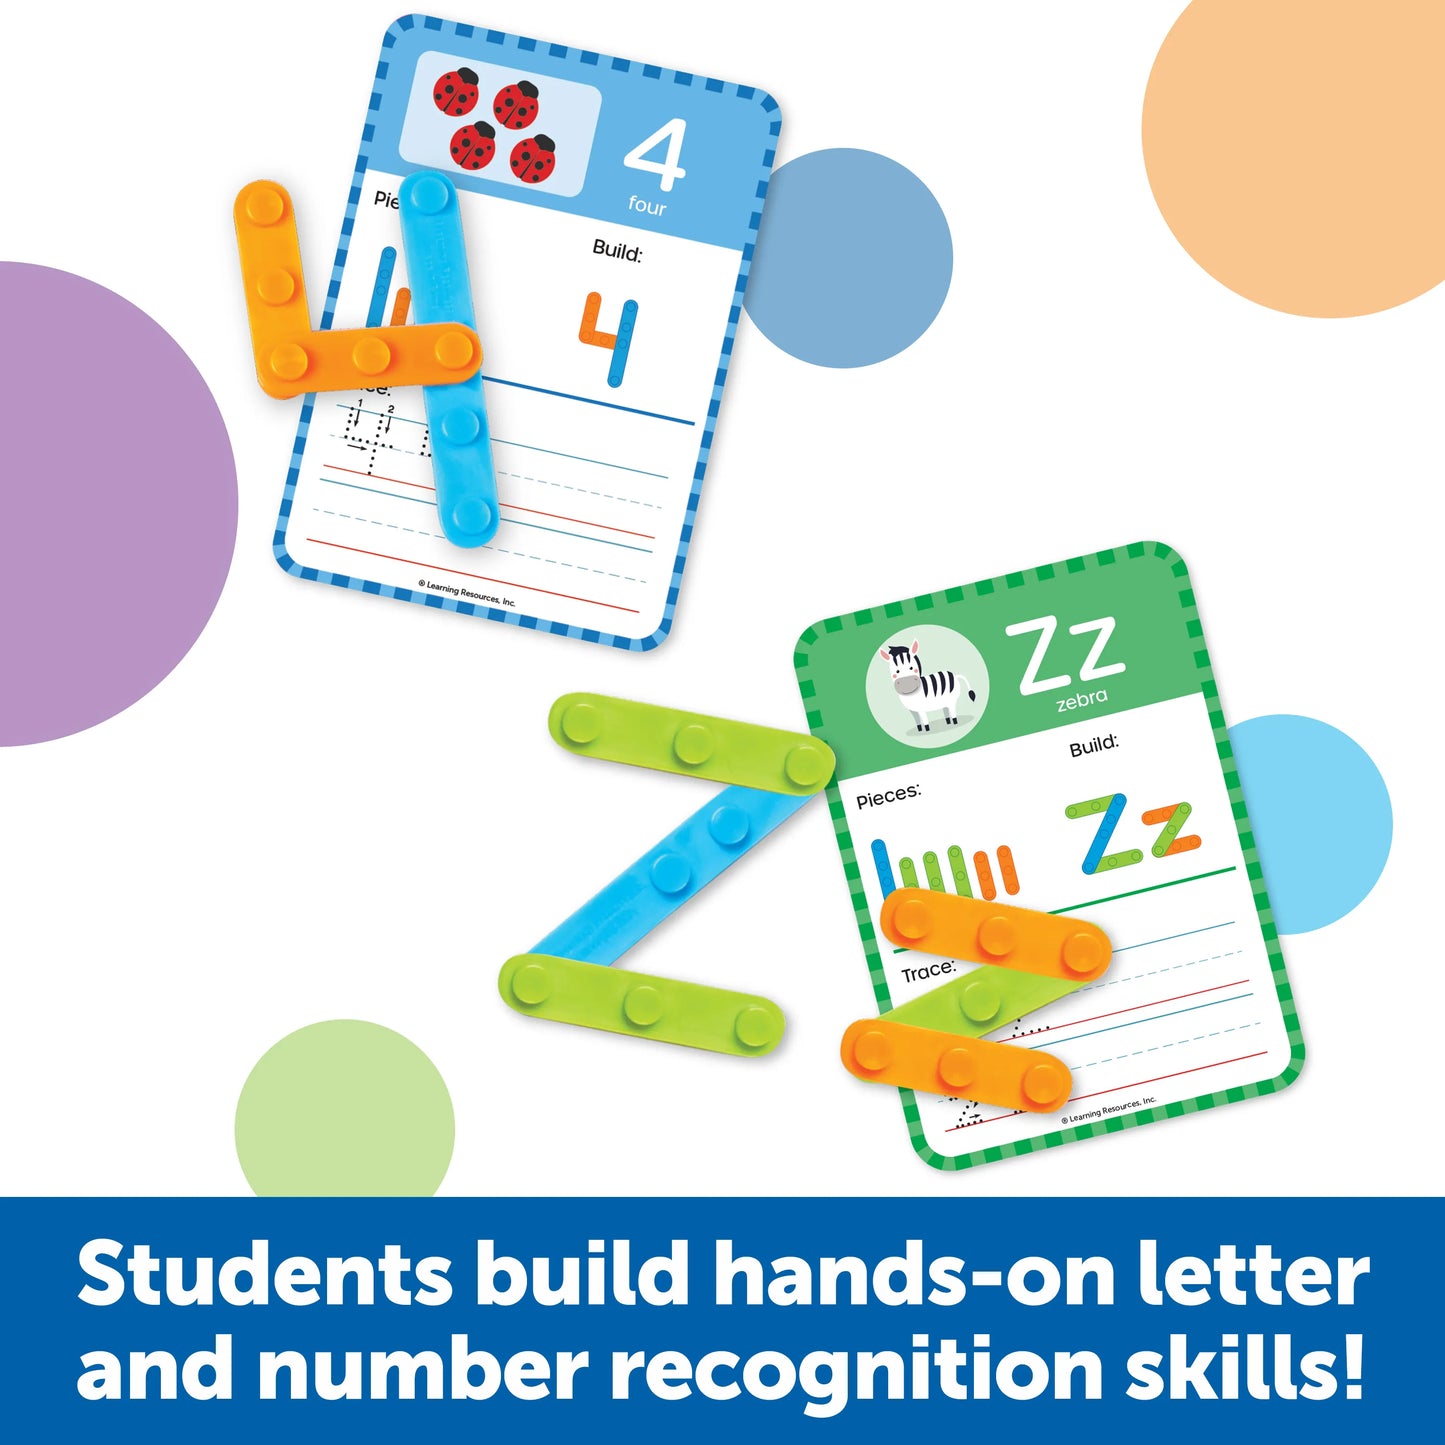 Learning Resources Skill Builders! Letter and Number Maker Classroom Set